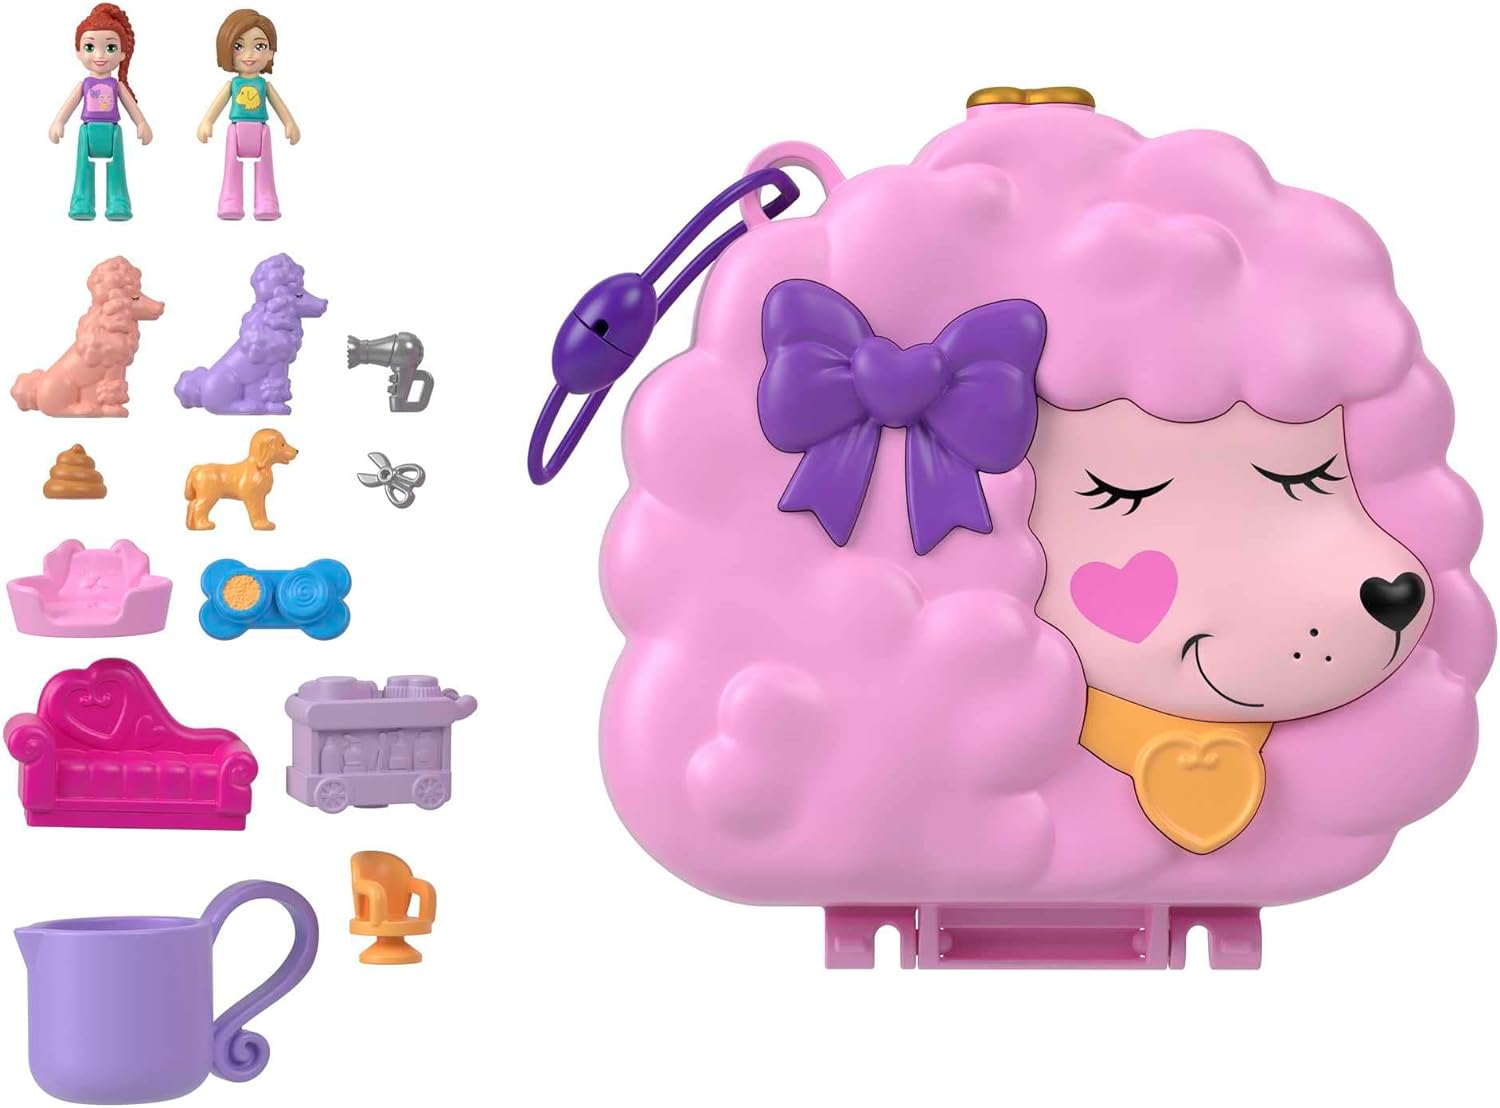 Polly Pocket Groom & Glam Poodle Compact Playset w/ 2 Micro Dolls (Color Change & Water Play) $7.99 + Free Shipping w/ Prime or on $35+